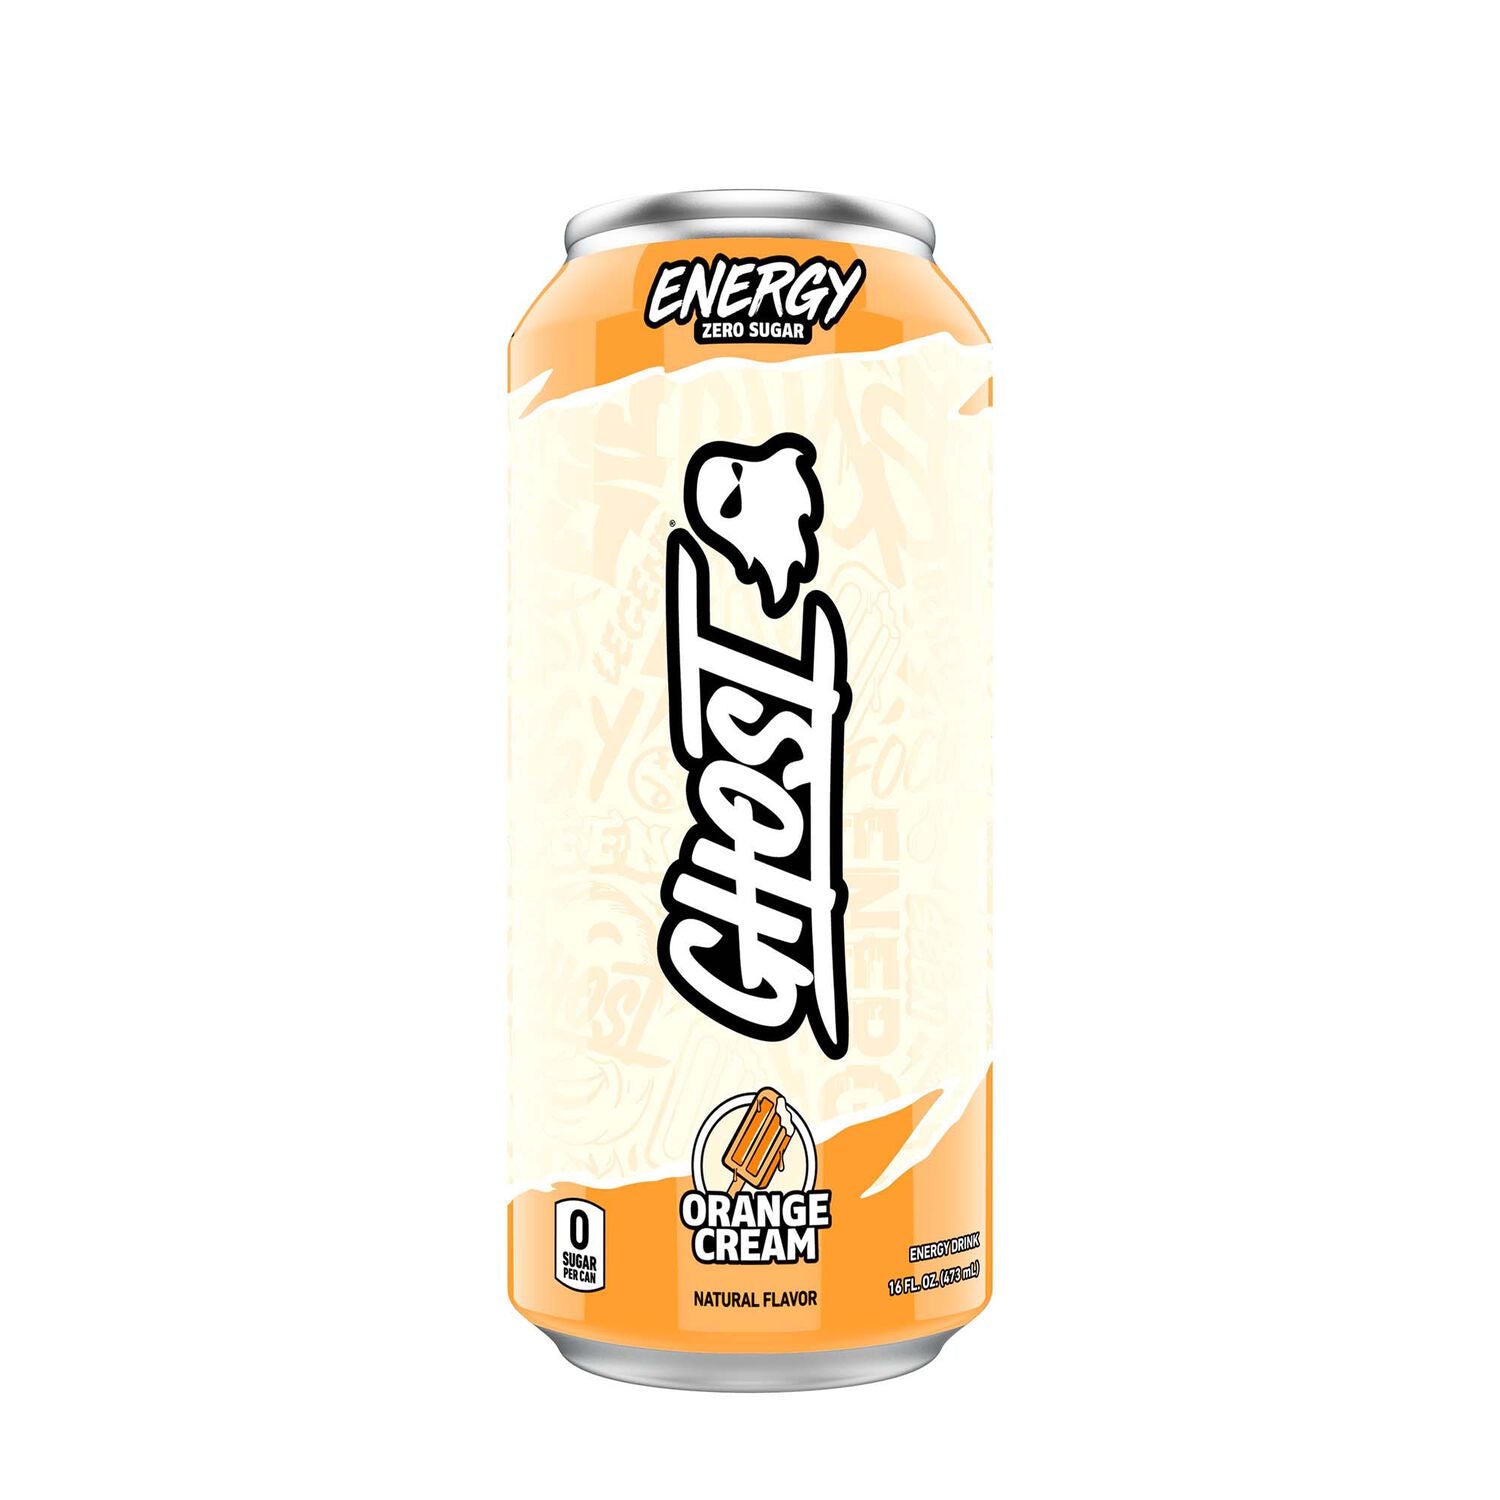 GHOST Energy Drink (1 can) Protein Snacks Orange Cream GHOST